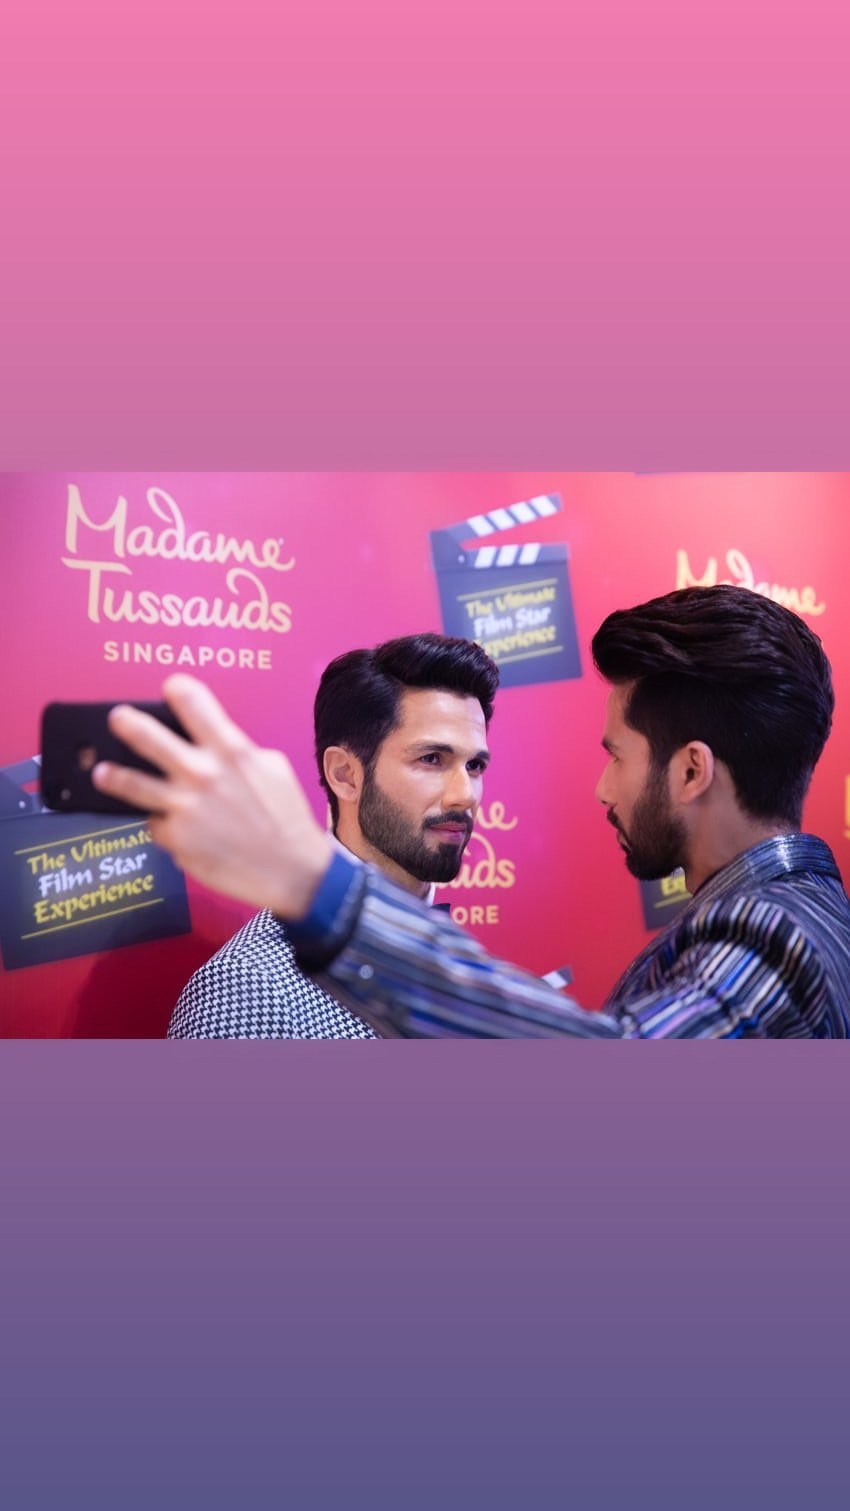 Pics-Videos! Shahid Kapoor unveils his first wax statue at Madame Tussauds Singapore with wife Mira Rajput, Here's why kids Zain & Misha are missing!